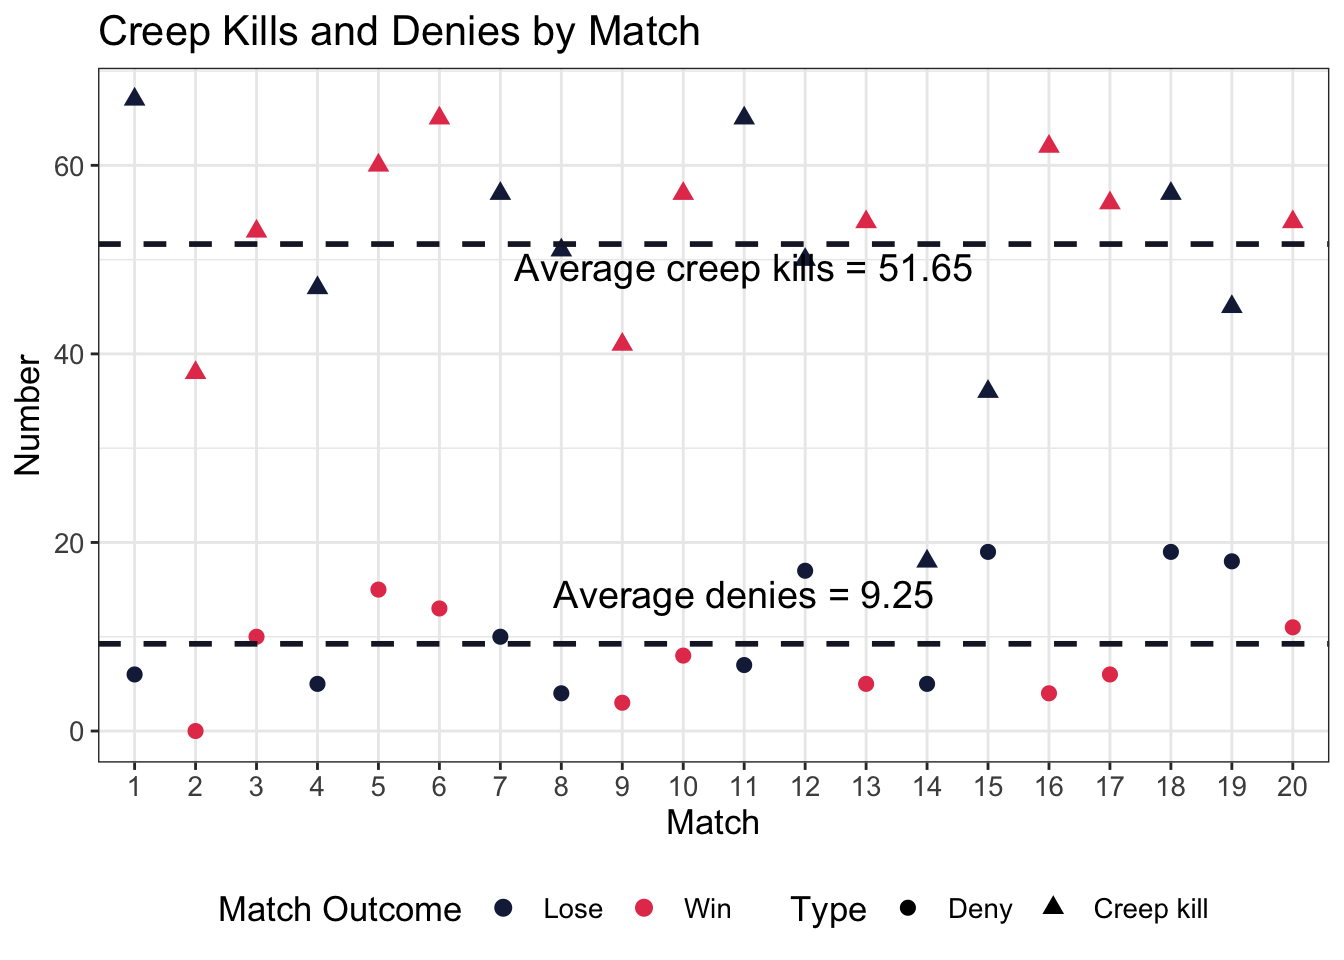 This figure shows both the cumulative creeps kills and denies for each of my most recent 20 matchs. Match 1 is the most recent match. Match 20 is the least recent match. A triangle represents the number of creep kills. A dot represents the number of denies. Red points represent a win. Black points represent a loss.